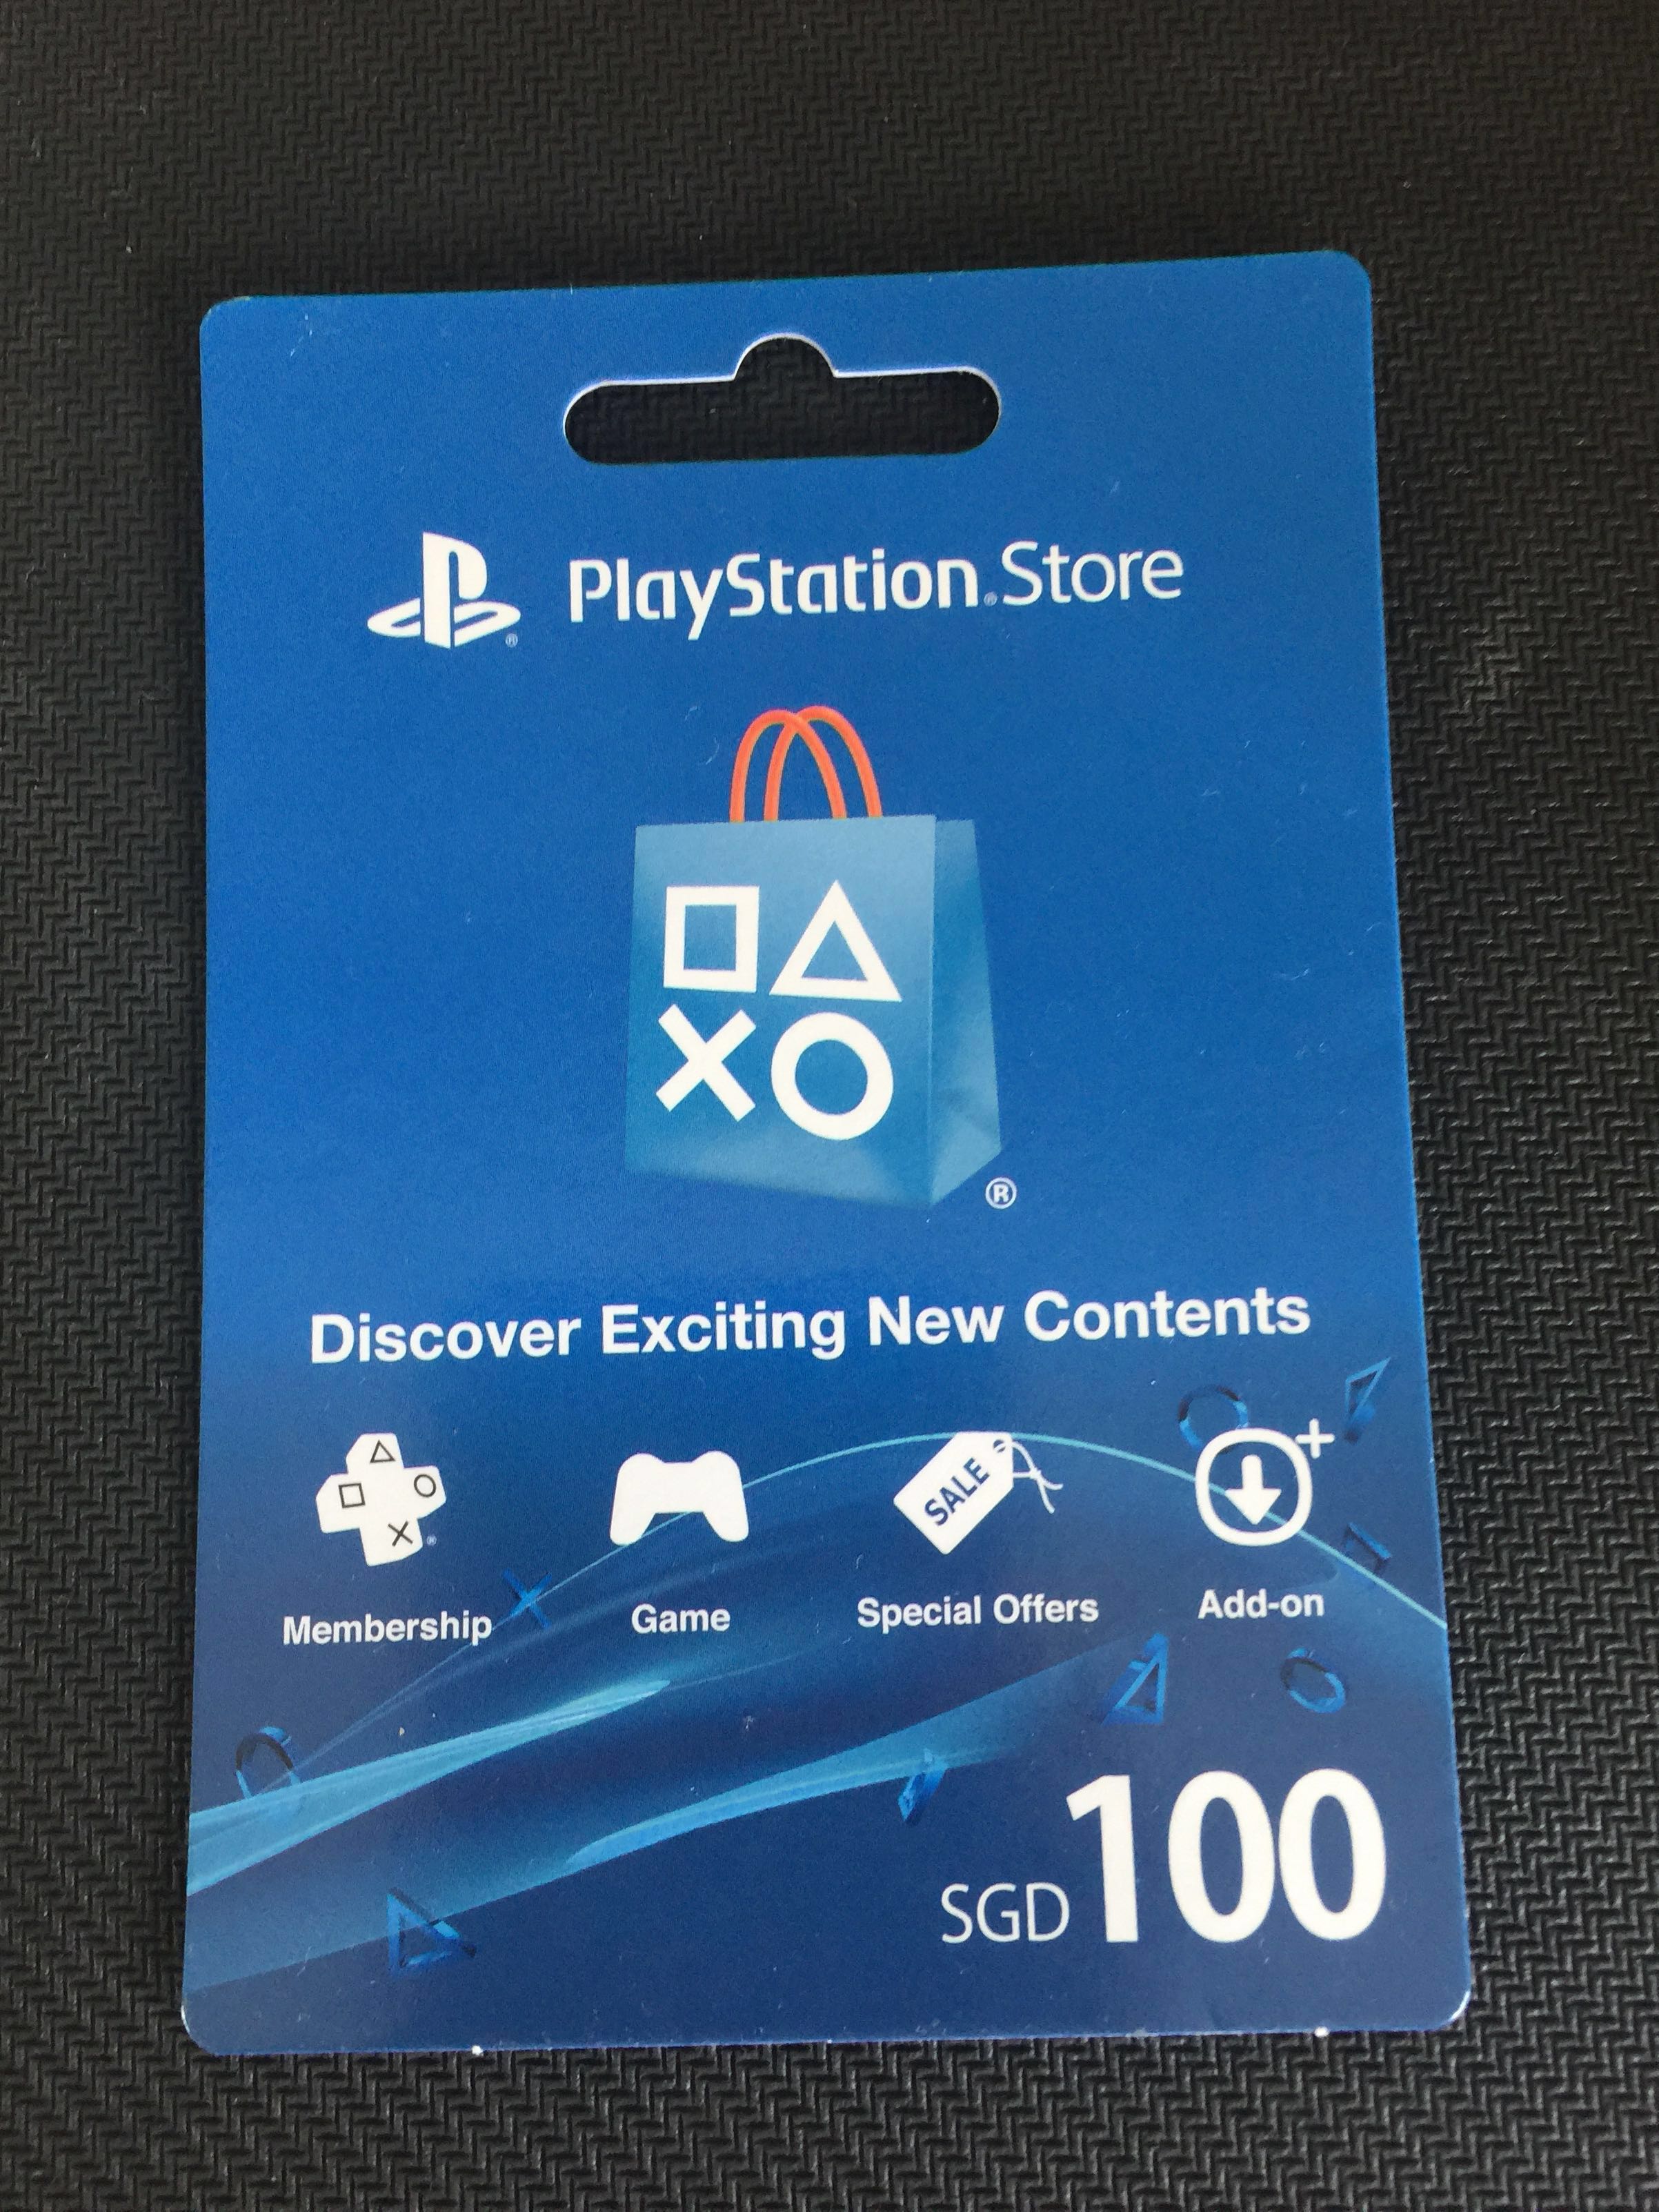 $100 ps4 gift card